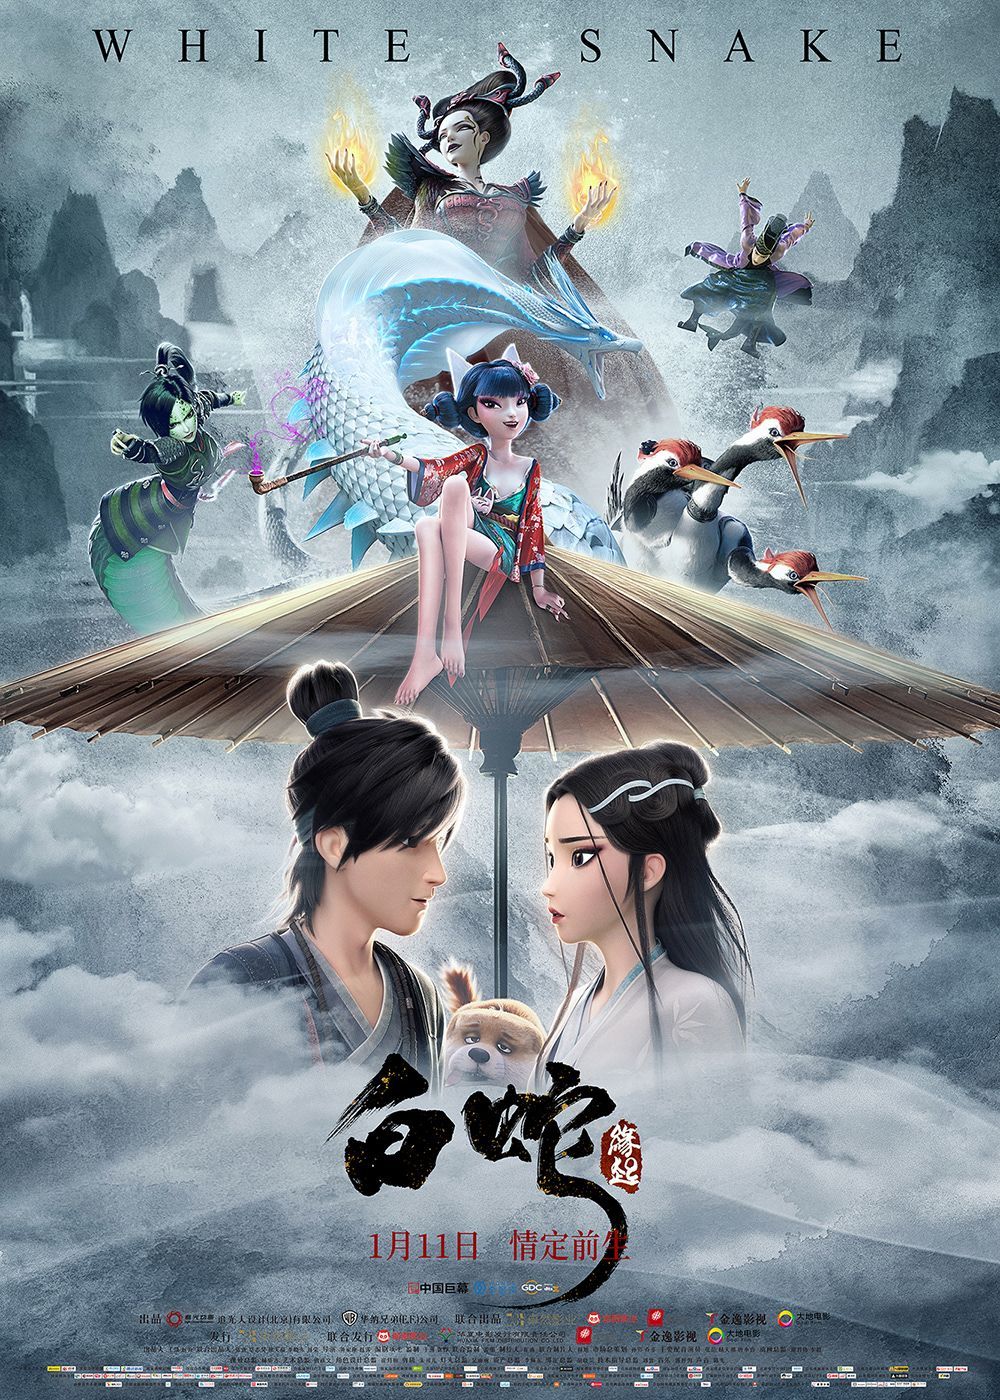 Poster of White Snake (2019 ). Movies, Animation movie, Snake